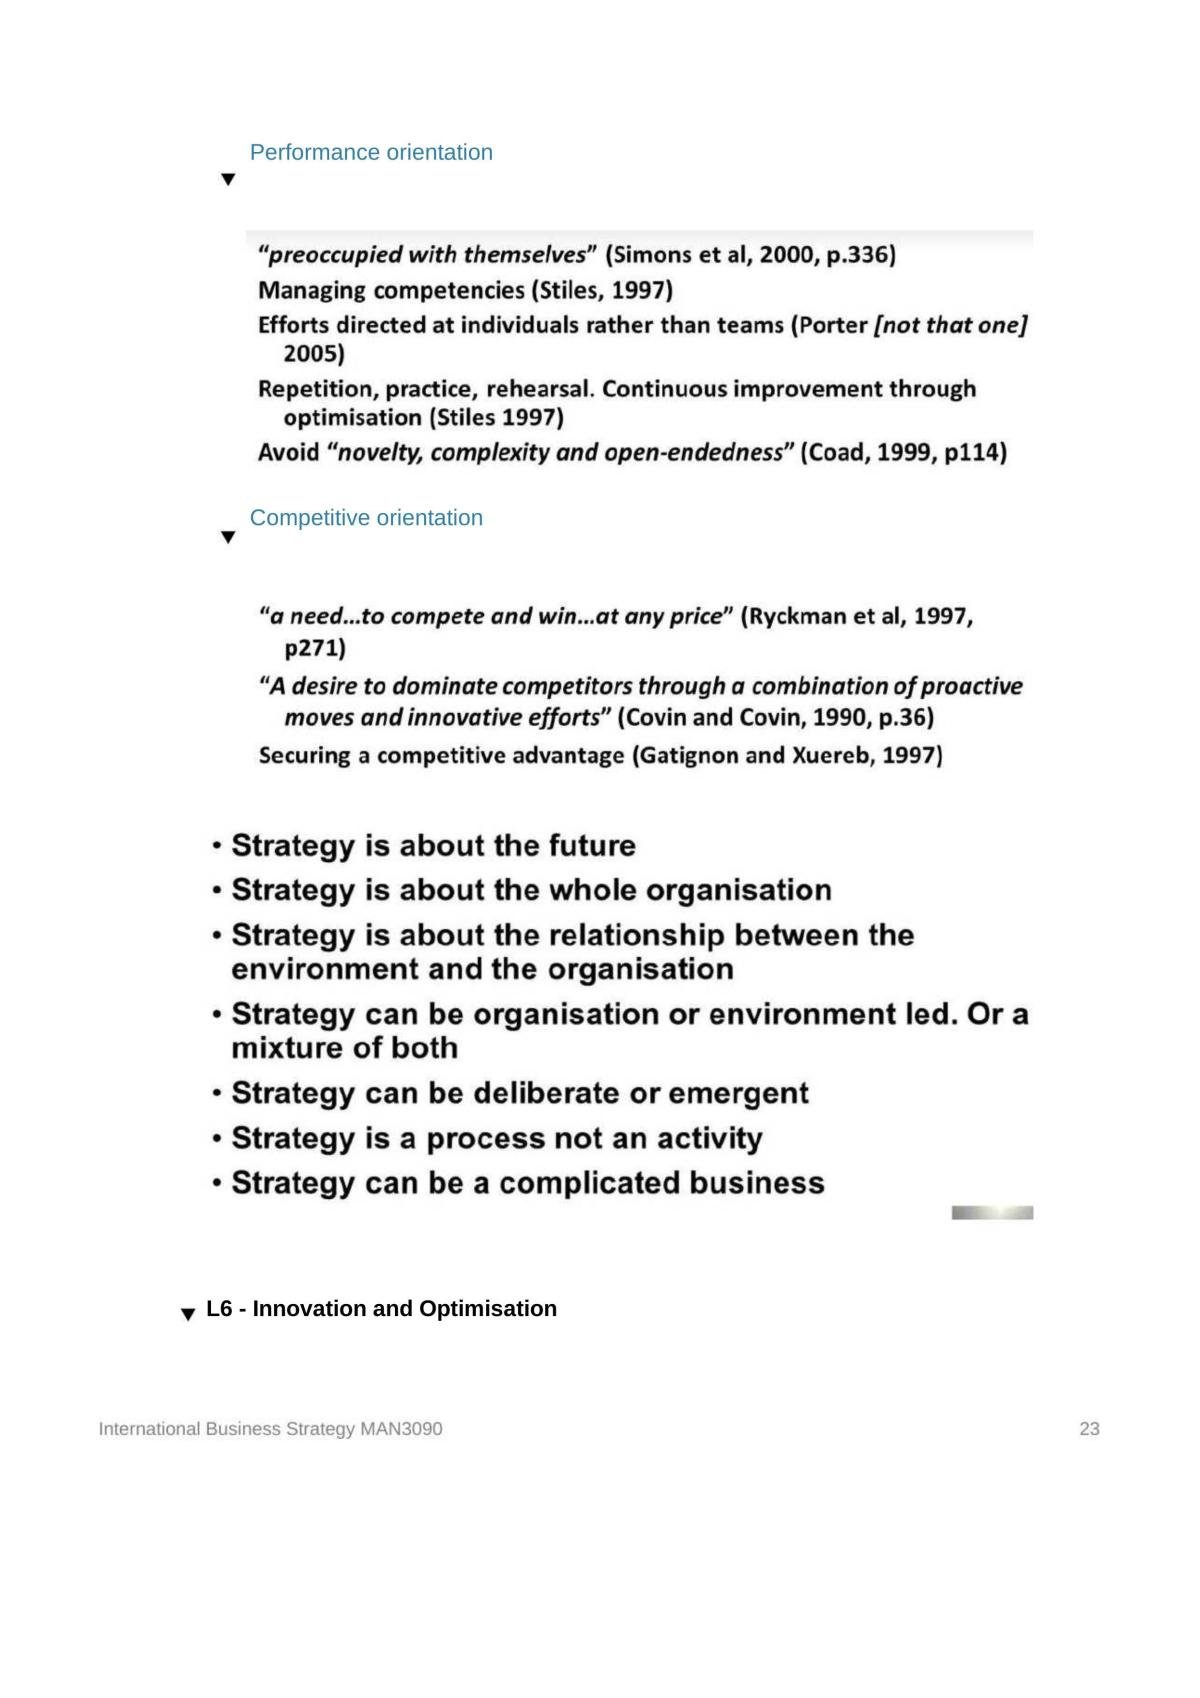 International Business Strategy Week 1-11 Review - Page 23